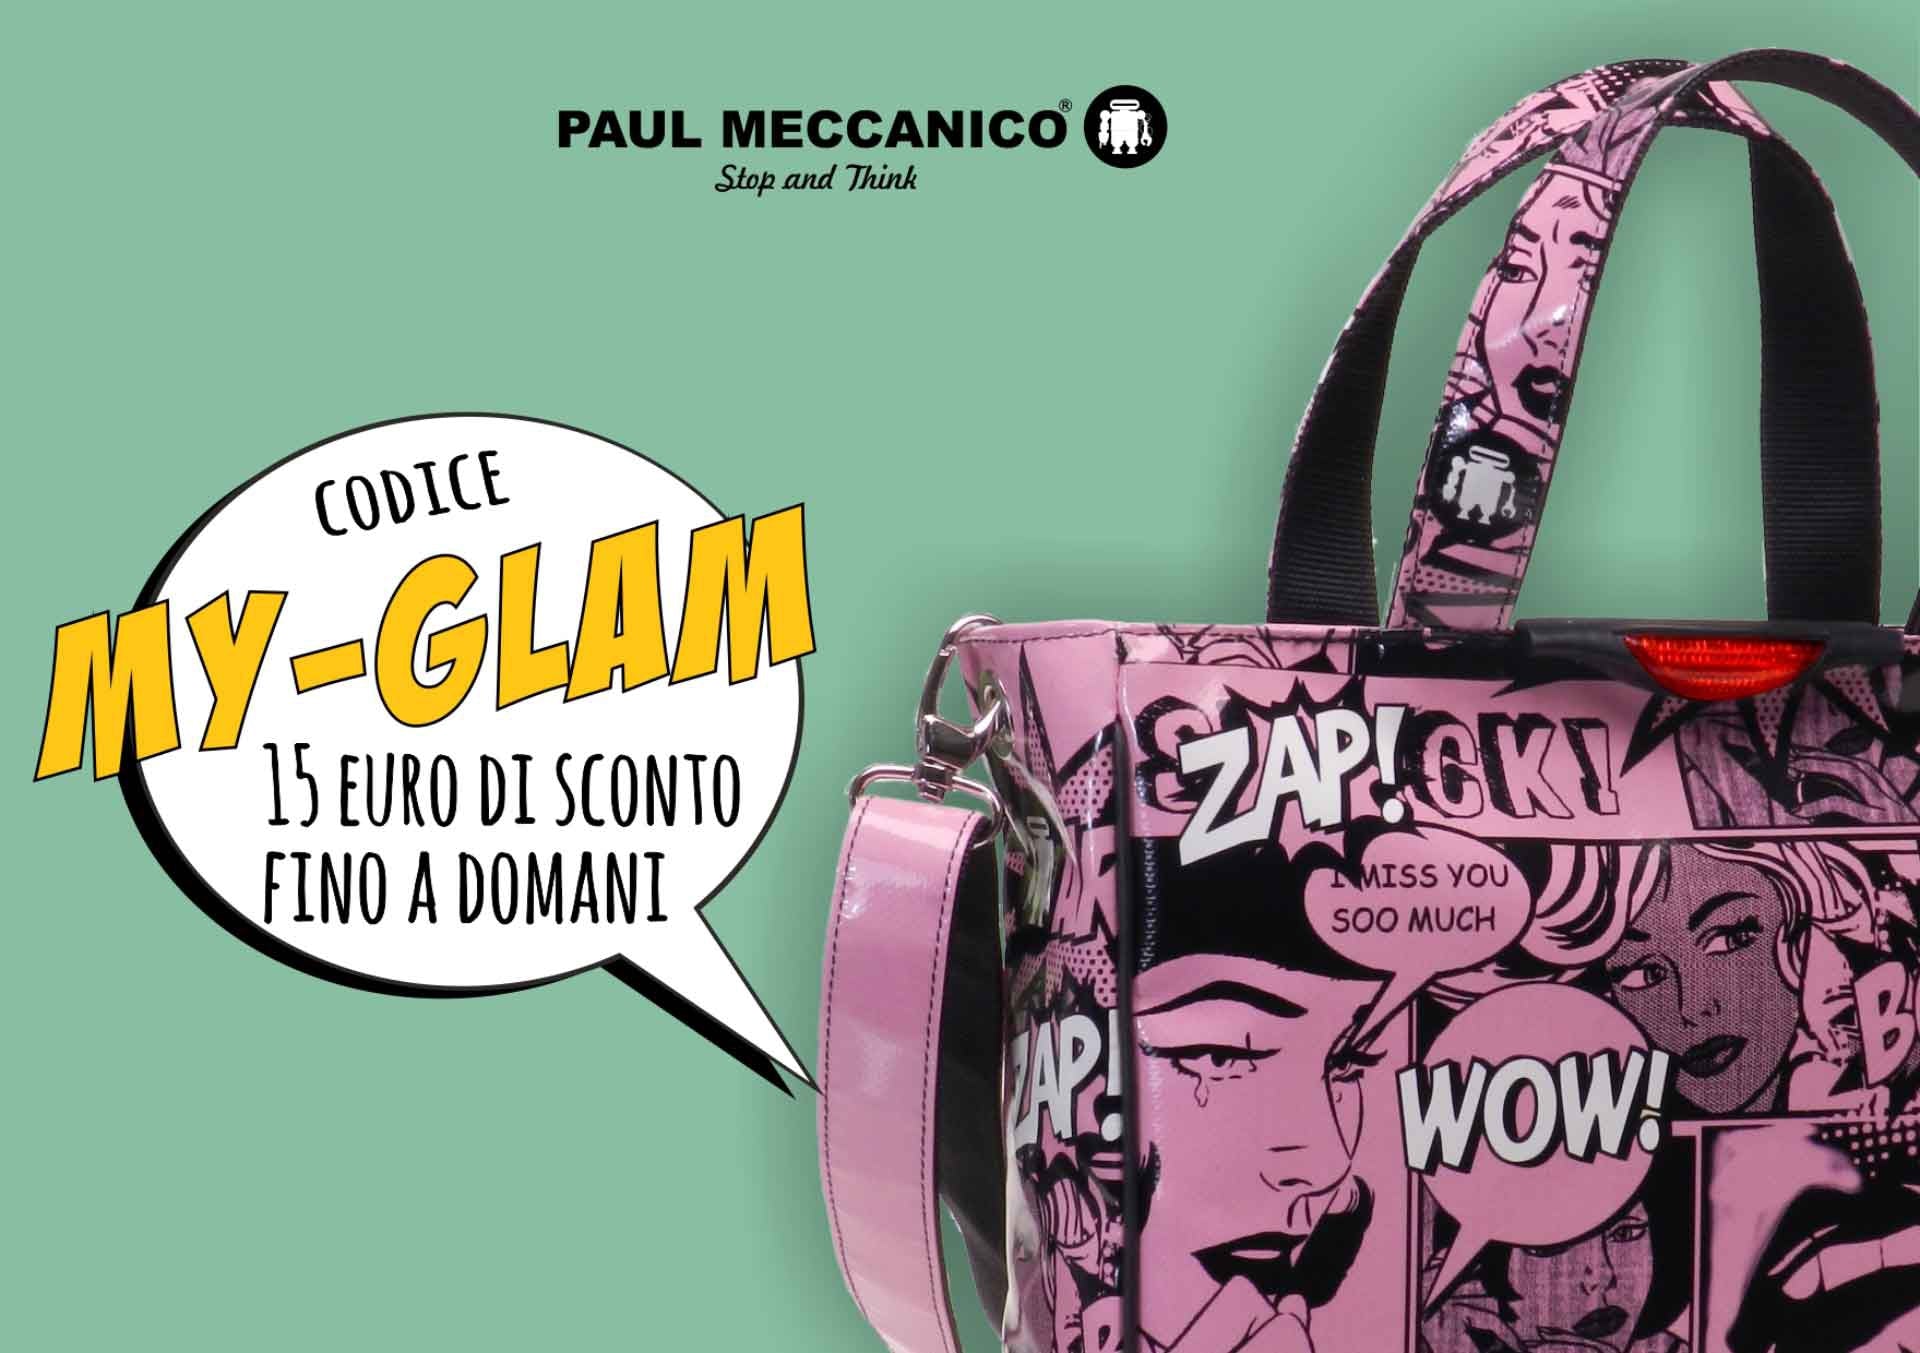 Glam is online: the new tote bag by Paul Meccanico-Paul Meccanico